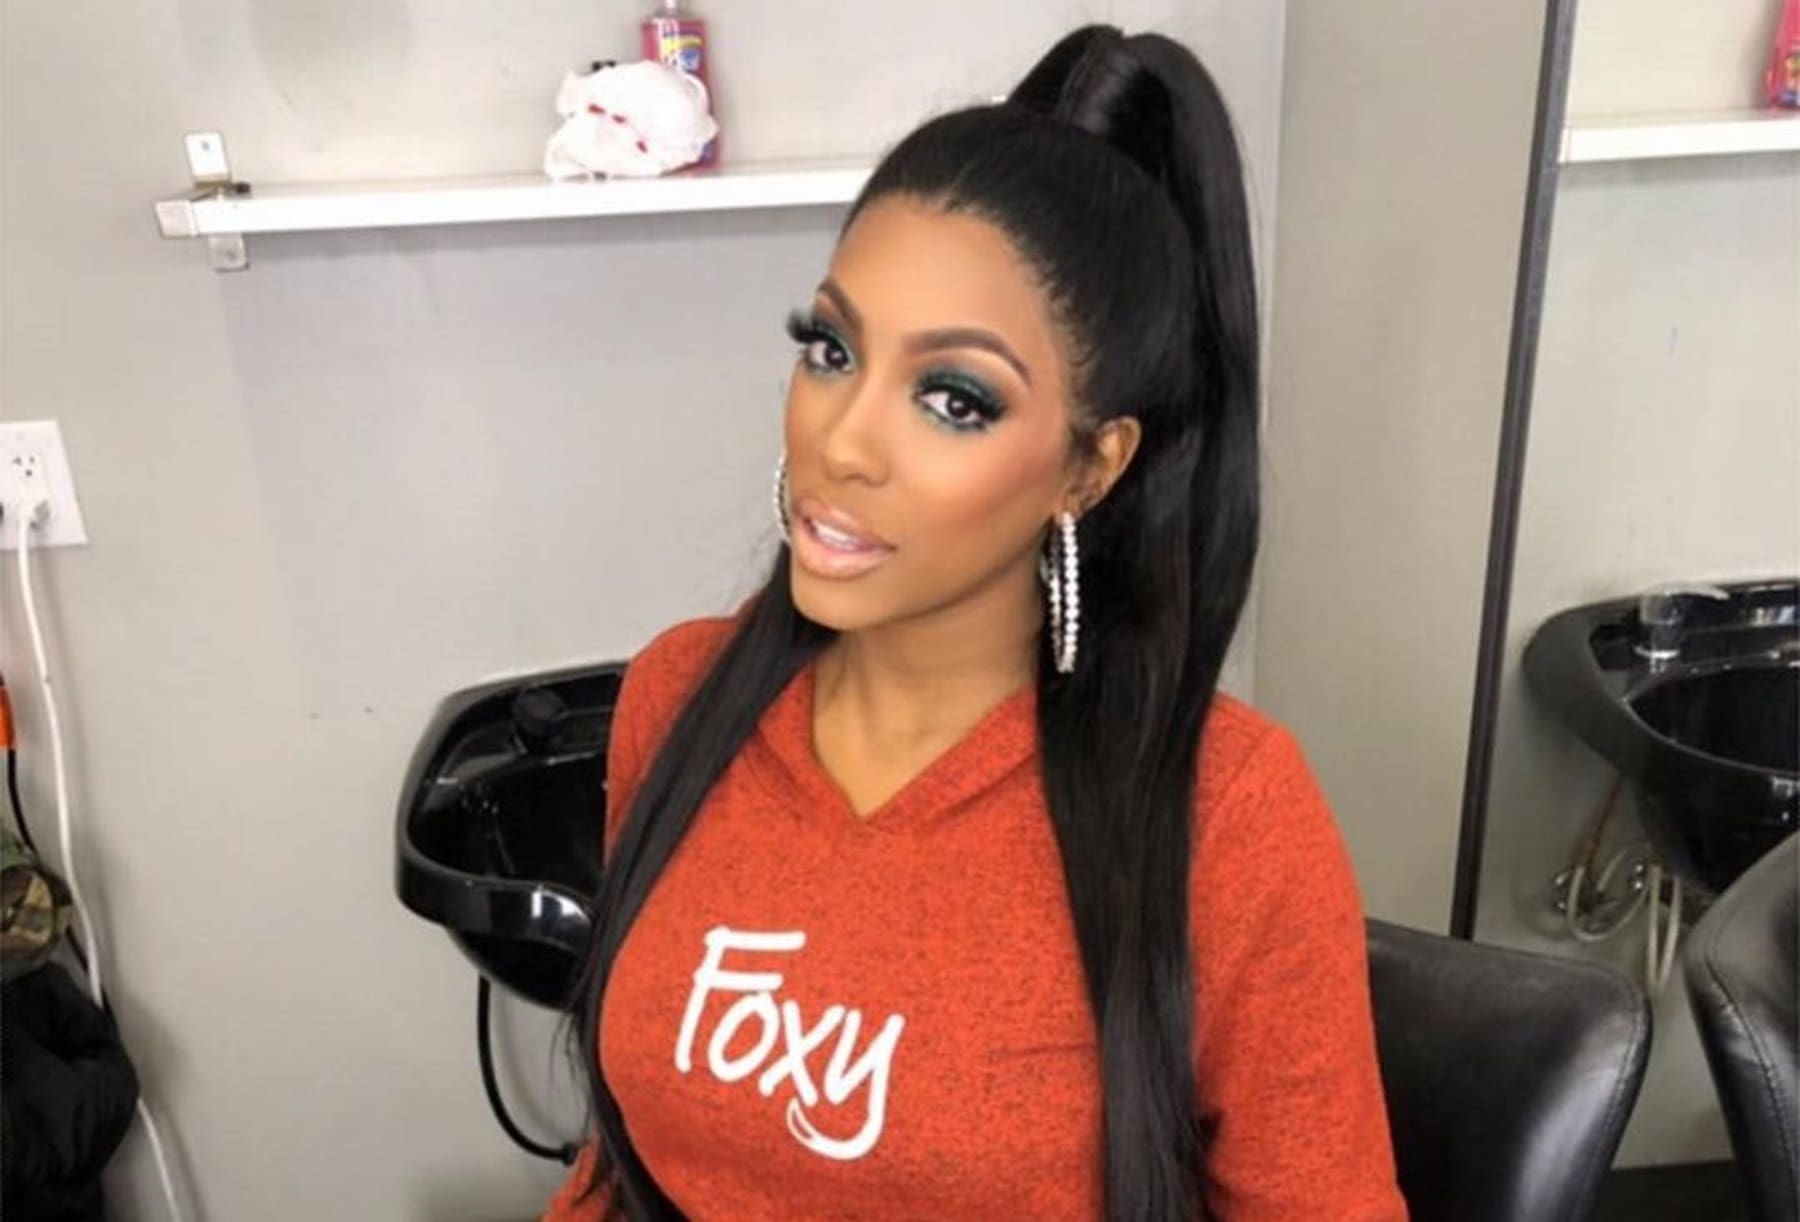 Porsha Williams' Toronto Carnival Pics Have Fans Praising Her And The Other RHOA Ladies - See Why People Criticize Kenya Moore's Look